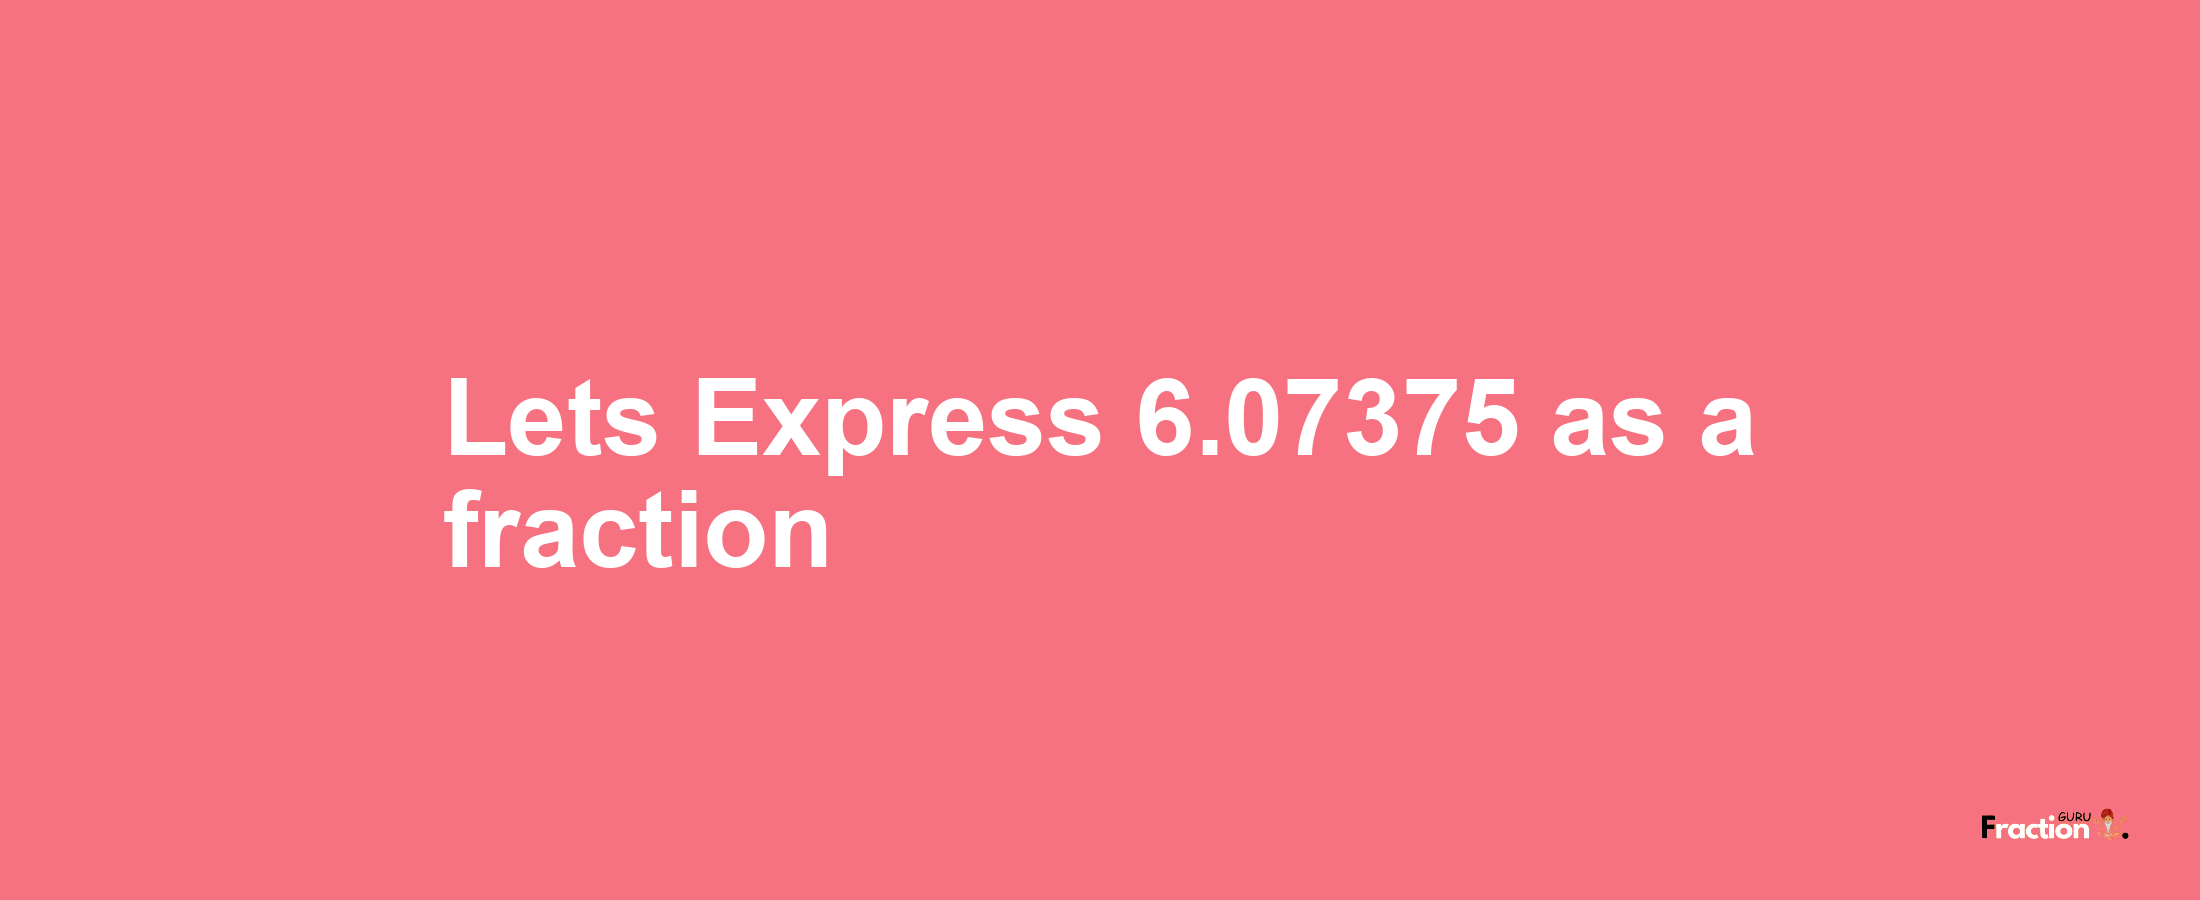 Lets Express 6.07375 as afraction